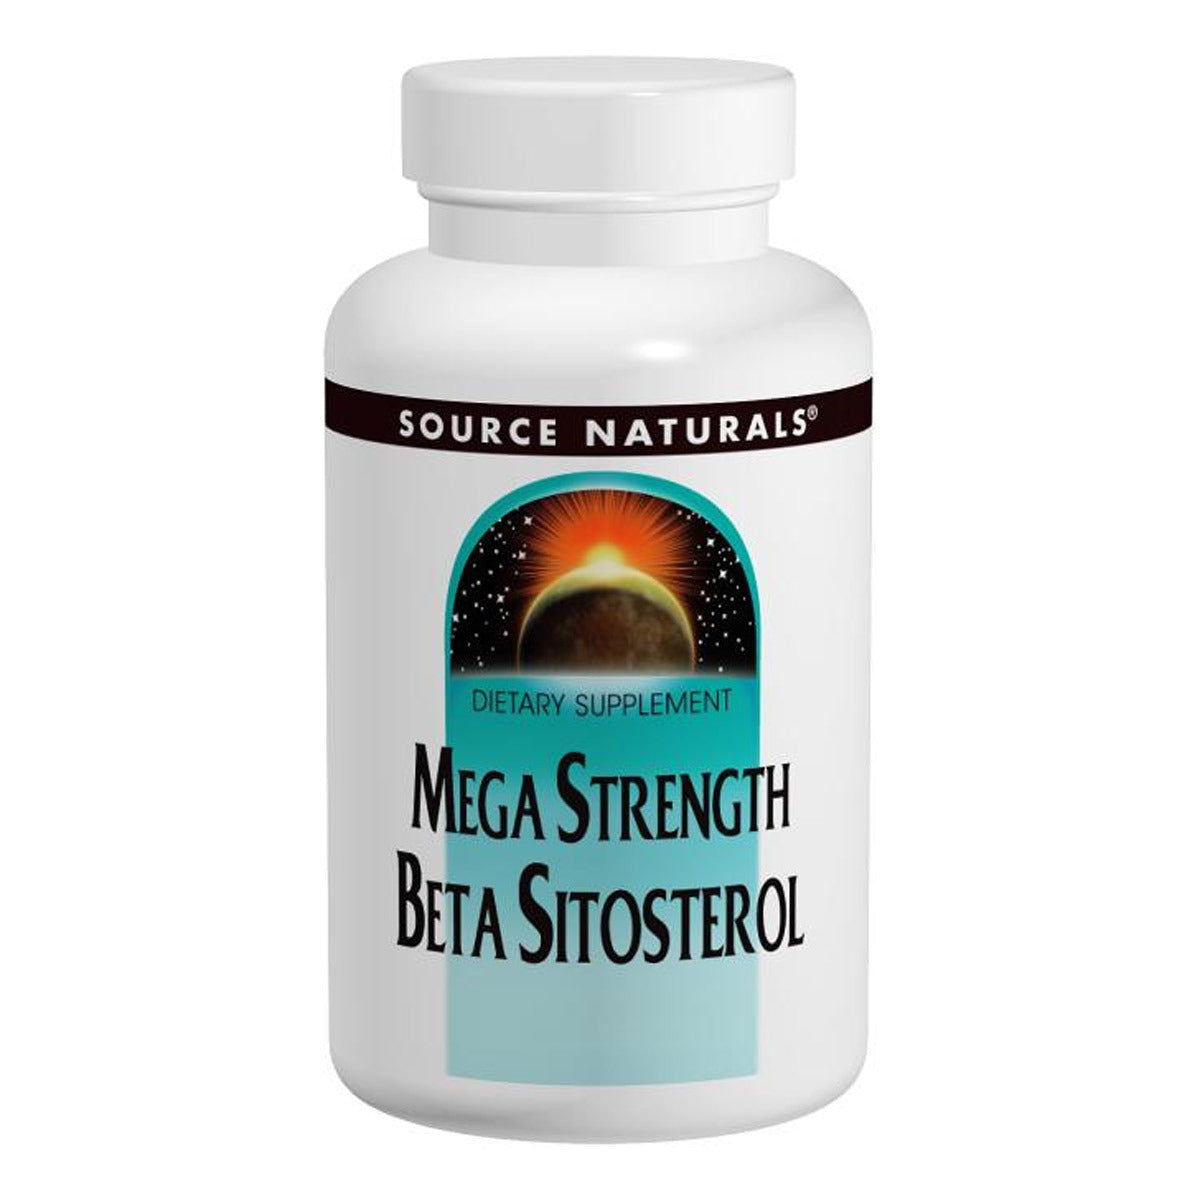 Primary image of Mega Strength Beta Sitosterol